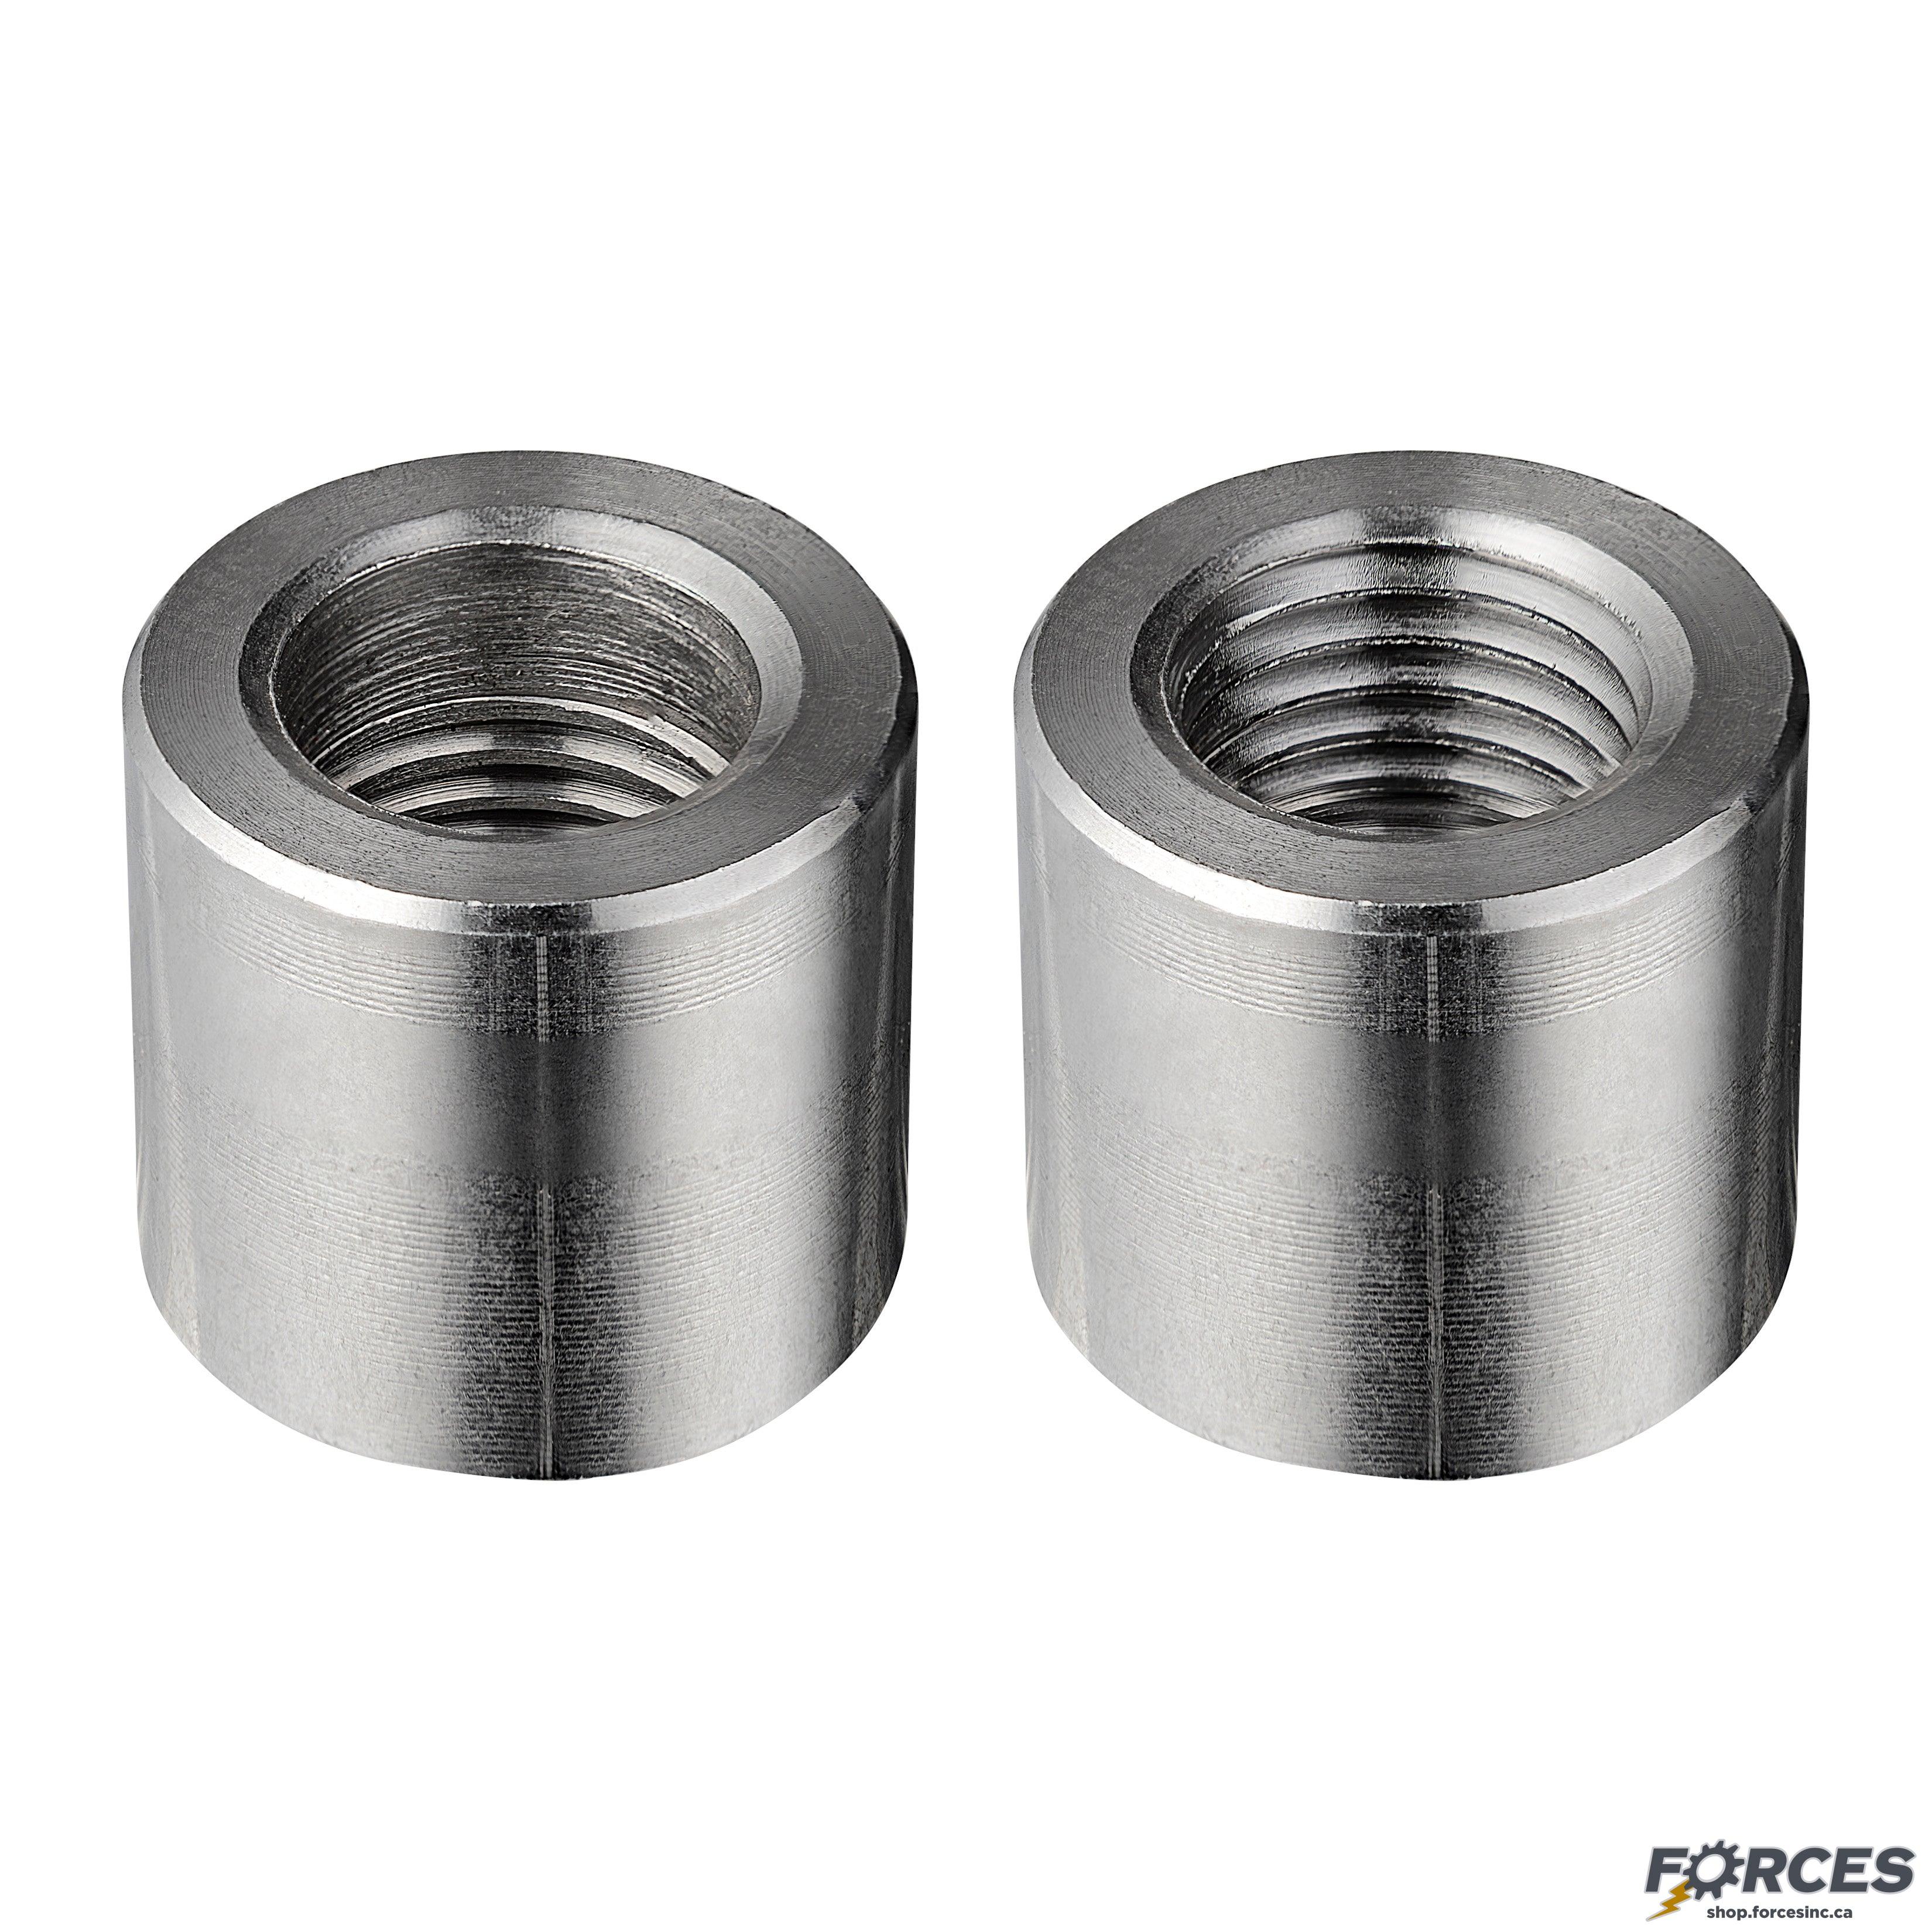 2" Half-Coupling NPT #3000 - Stainless Steel 316 - Forces Inc